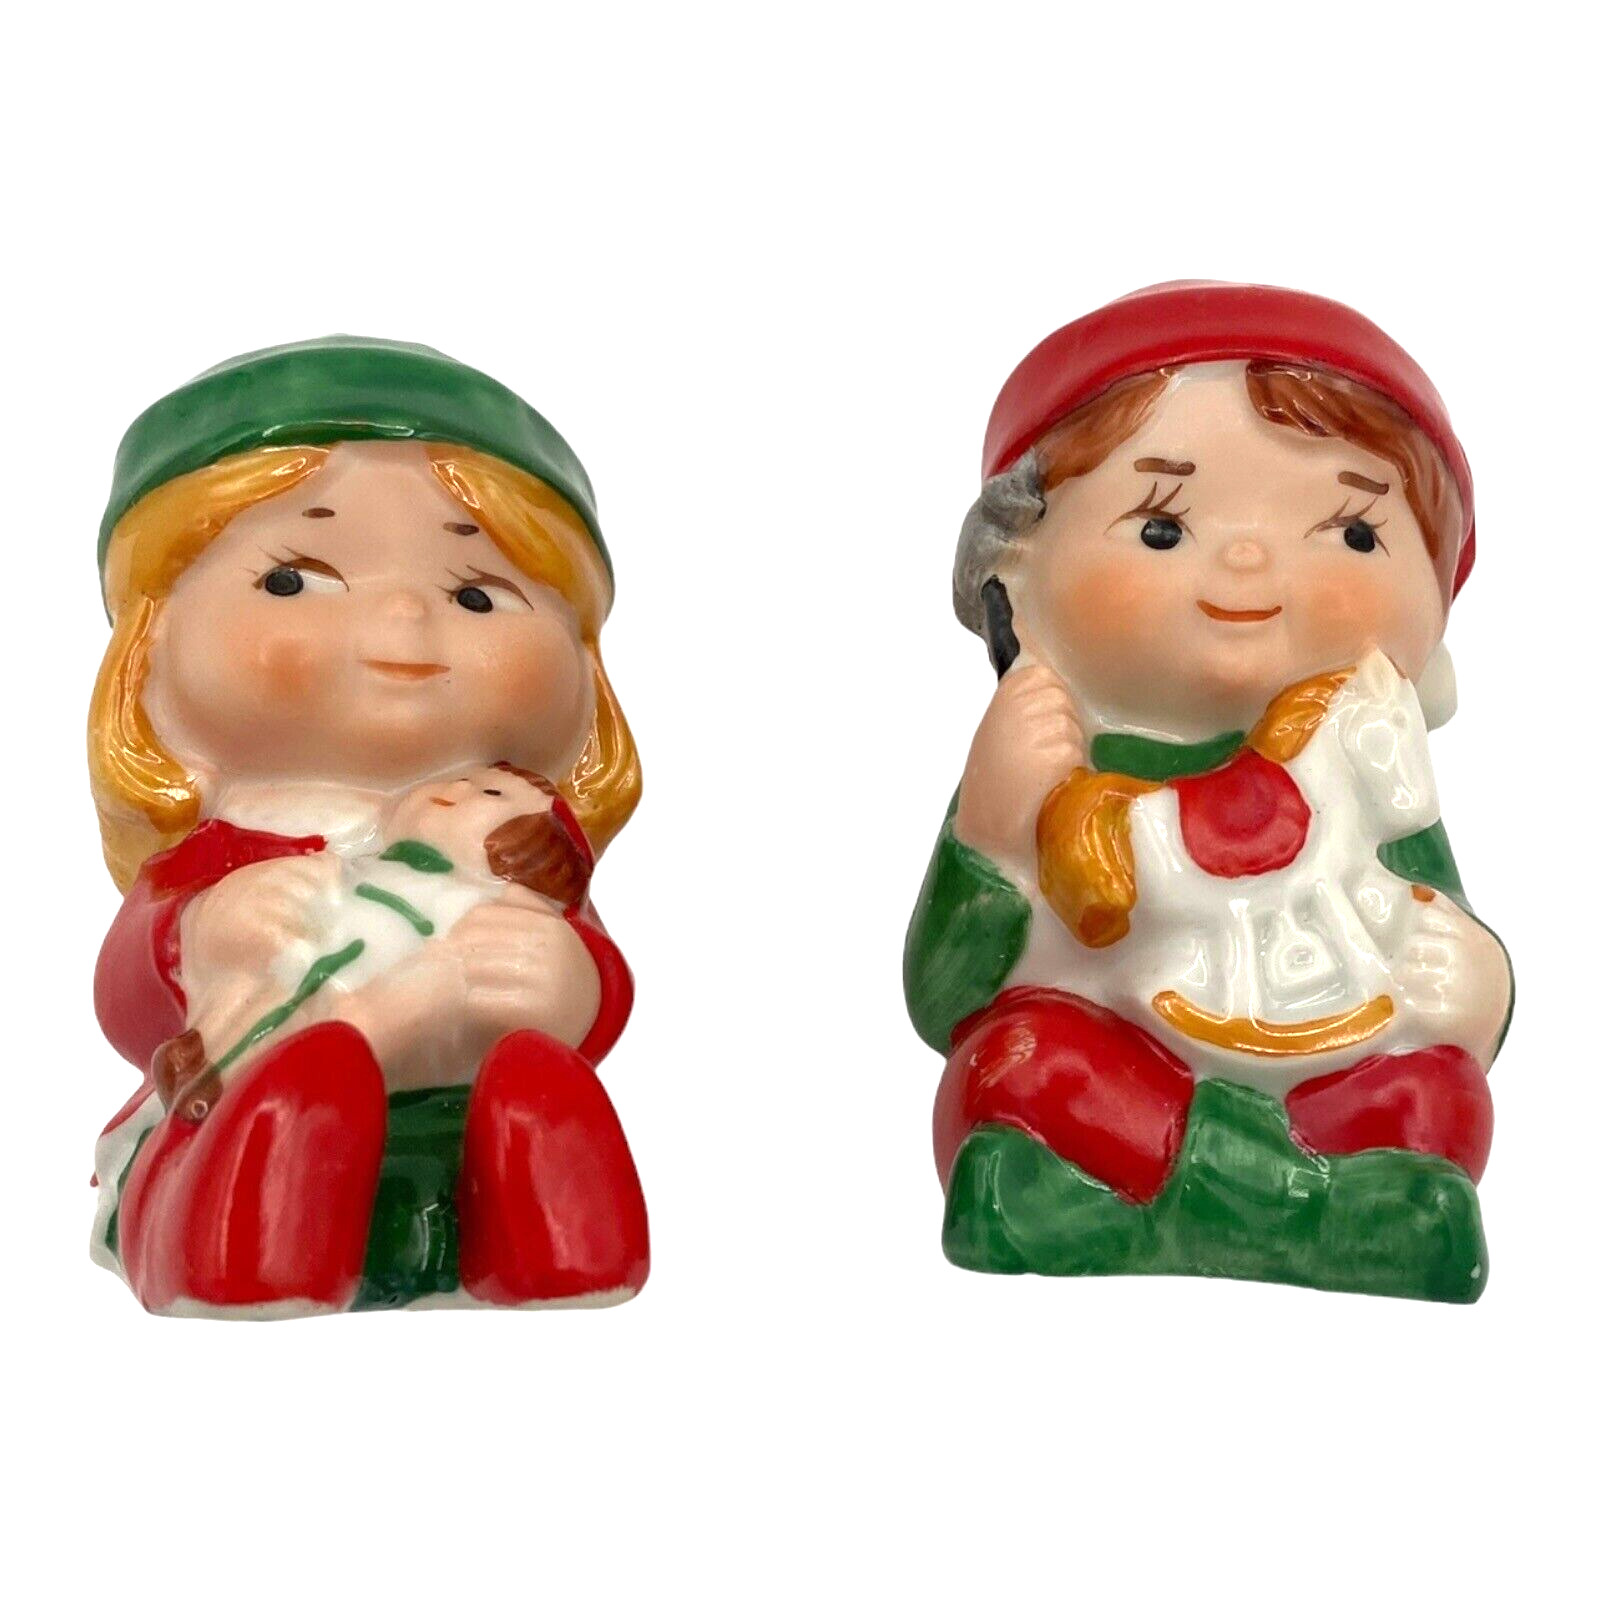 Vintage 1983 Avon Boy and Girl Elf Salt and Pepper Shakers Christmas Holiday 